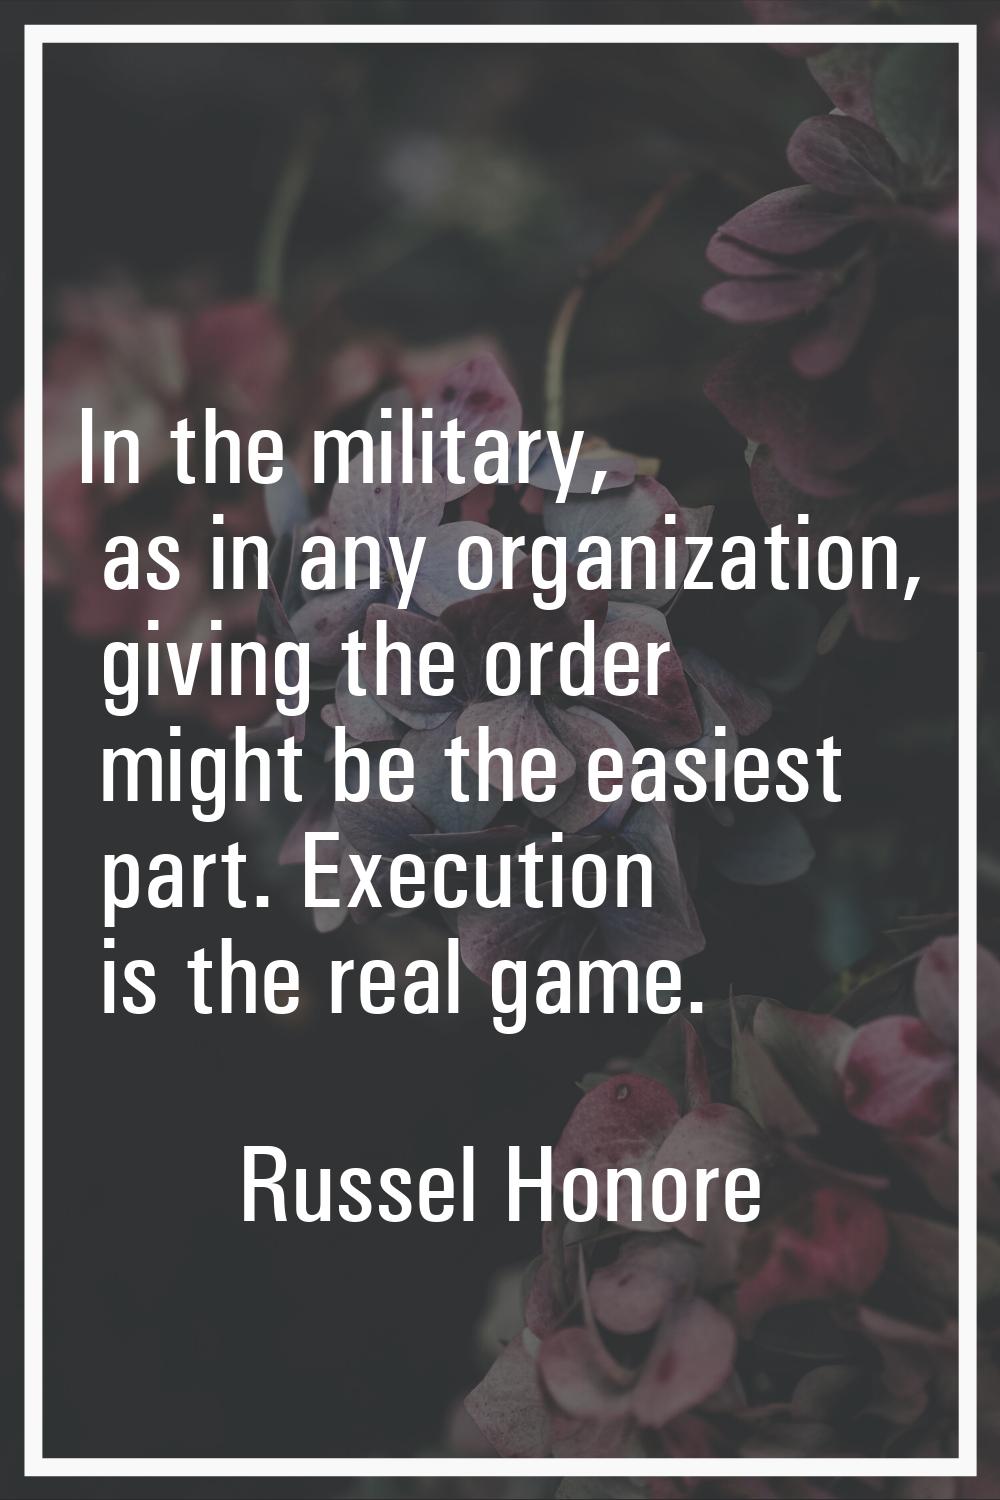 In the military, as in any organization, giving the order might be the easiest part. Execution is t